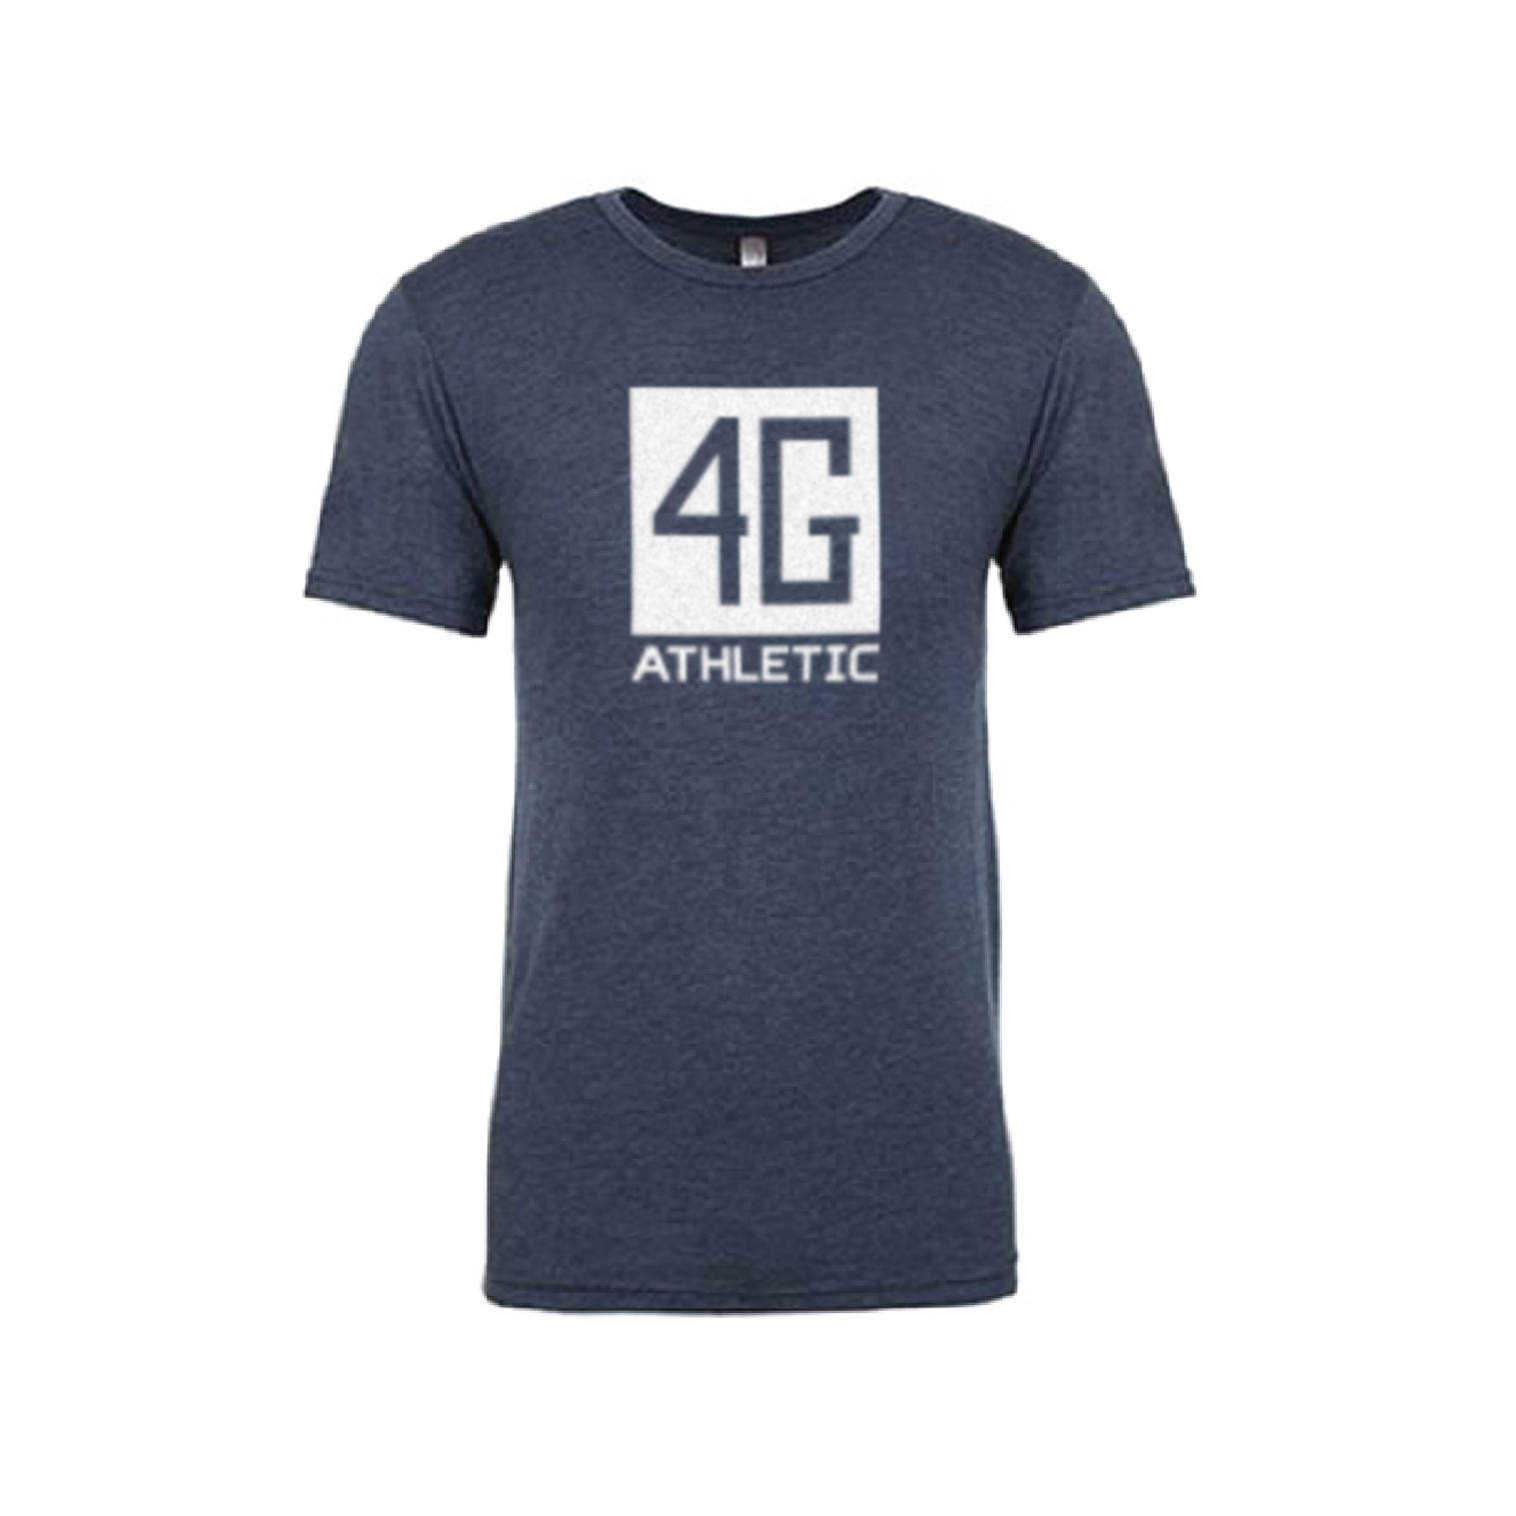 Men\'s Tshirt Blue for sale 4G from Athletic